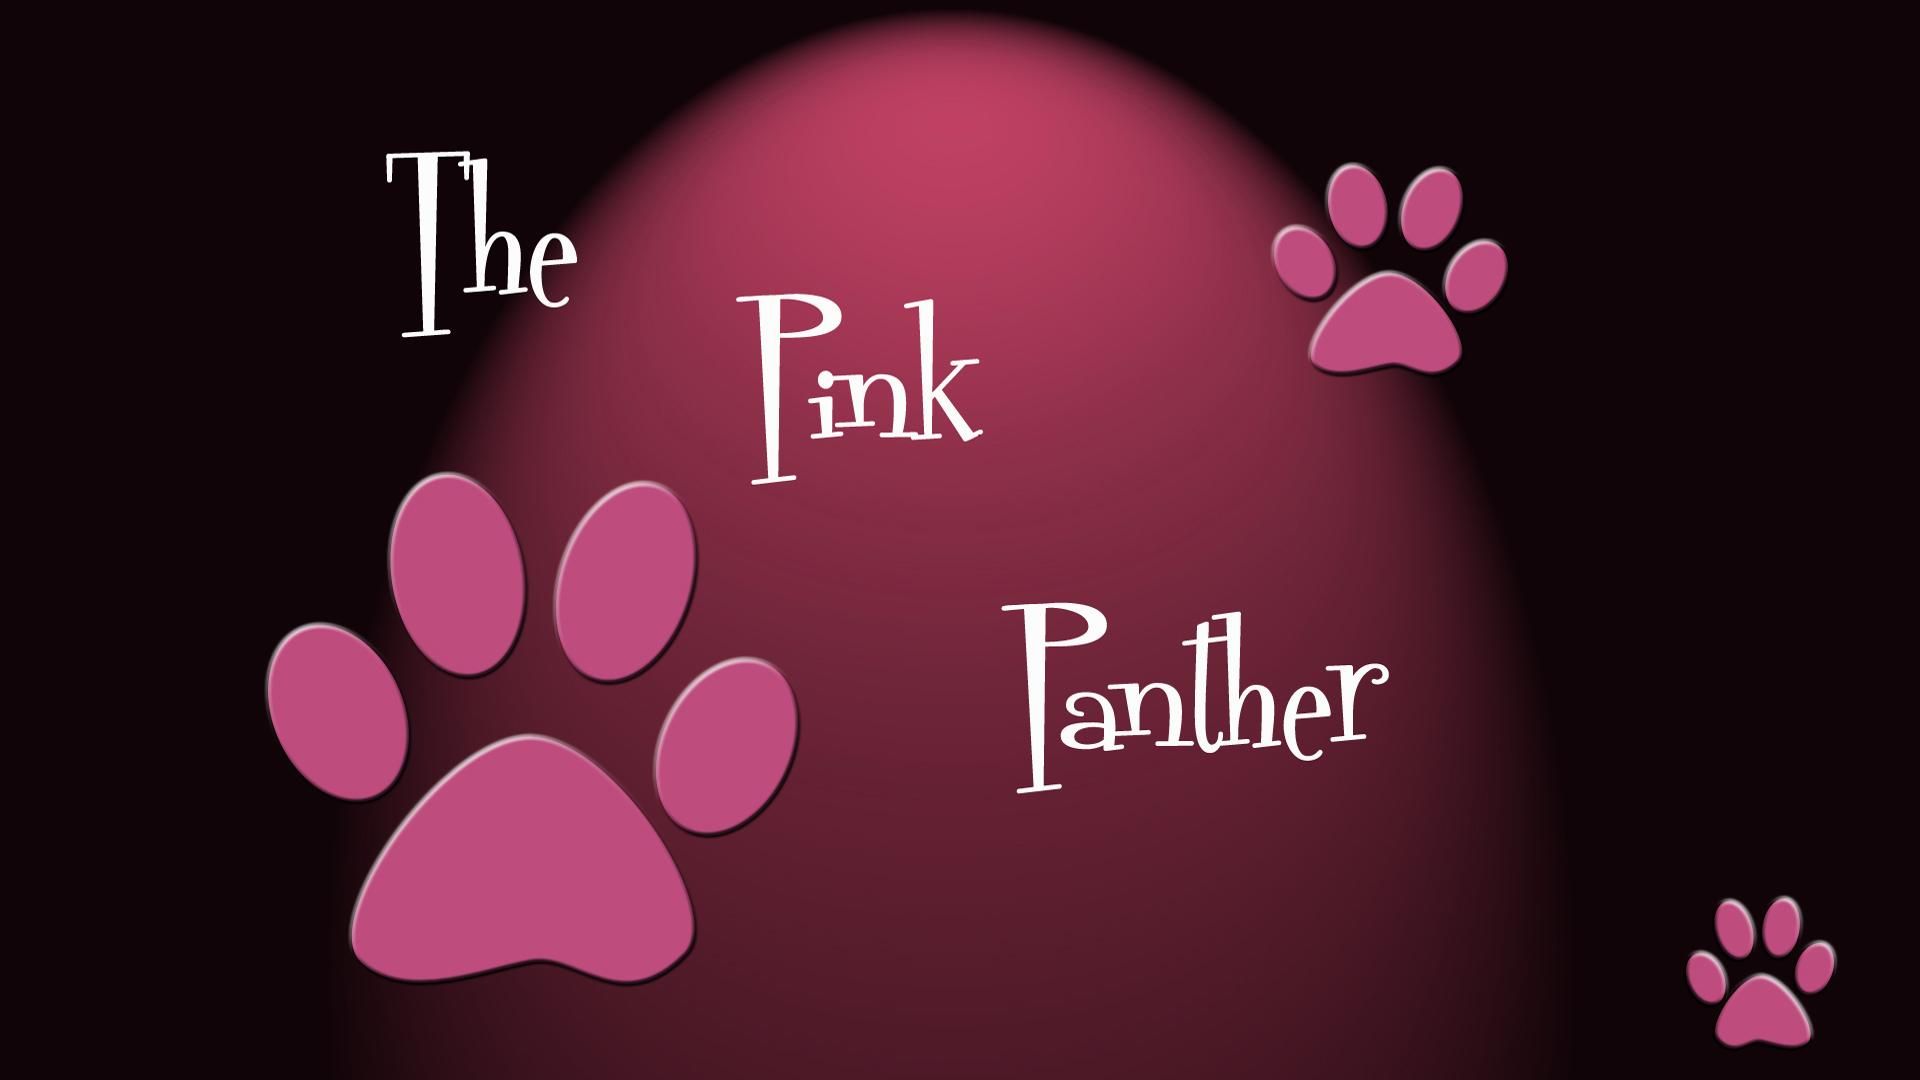 pink panther wallpaper for pc